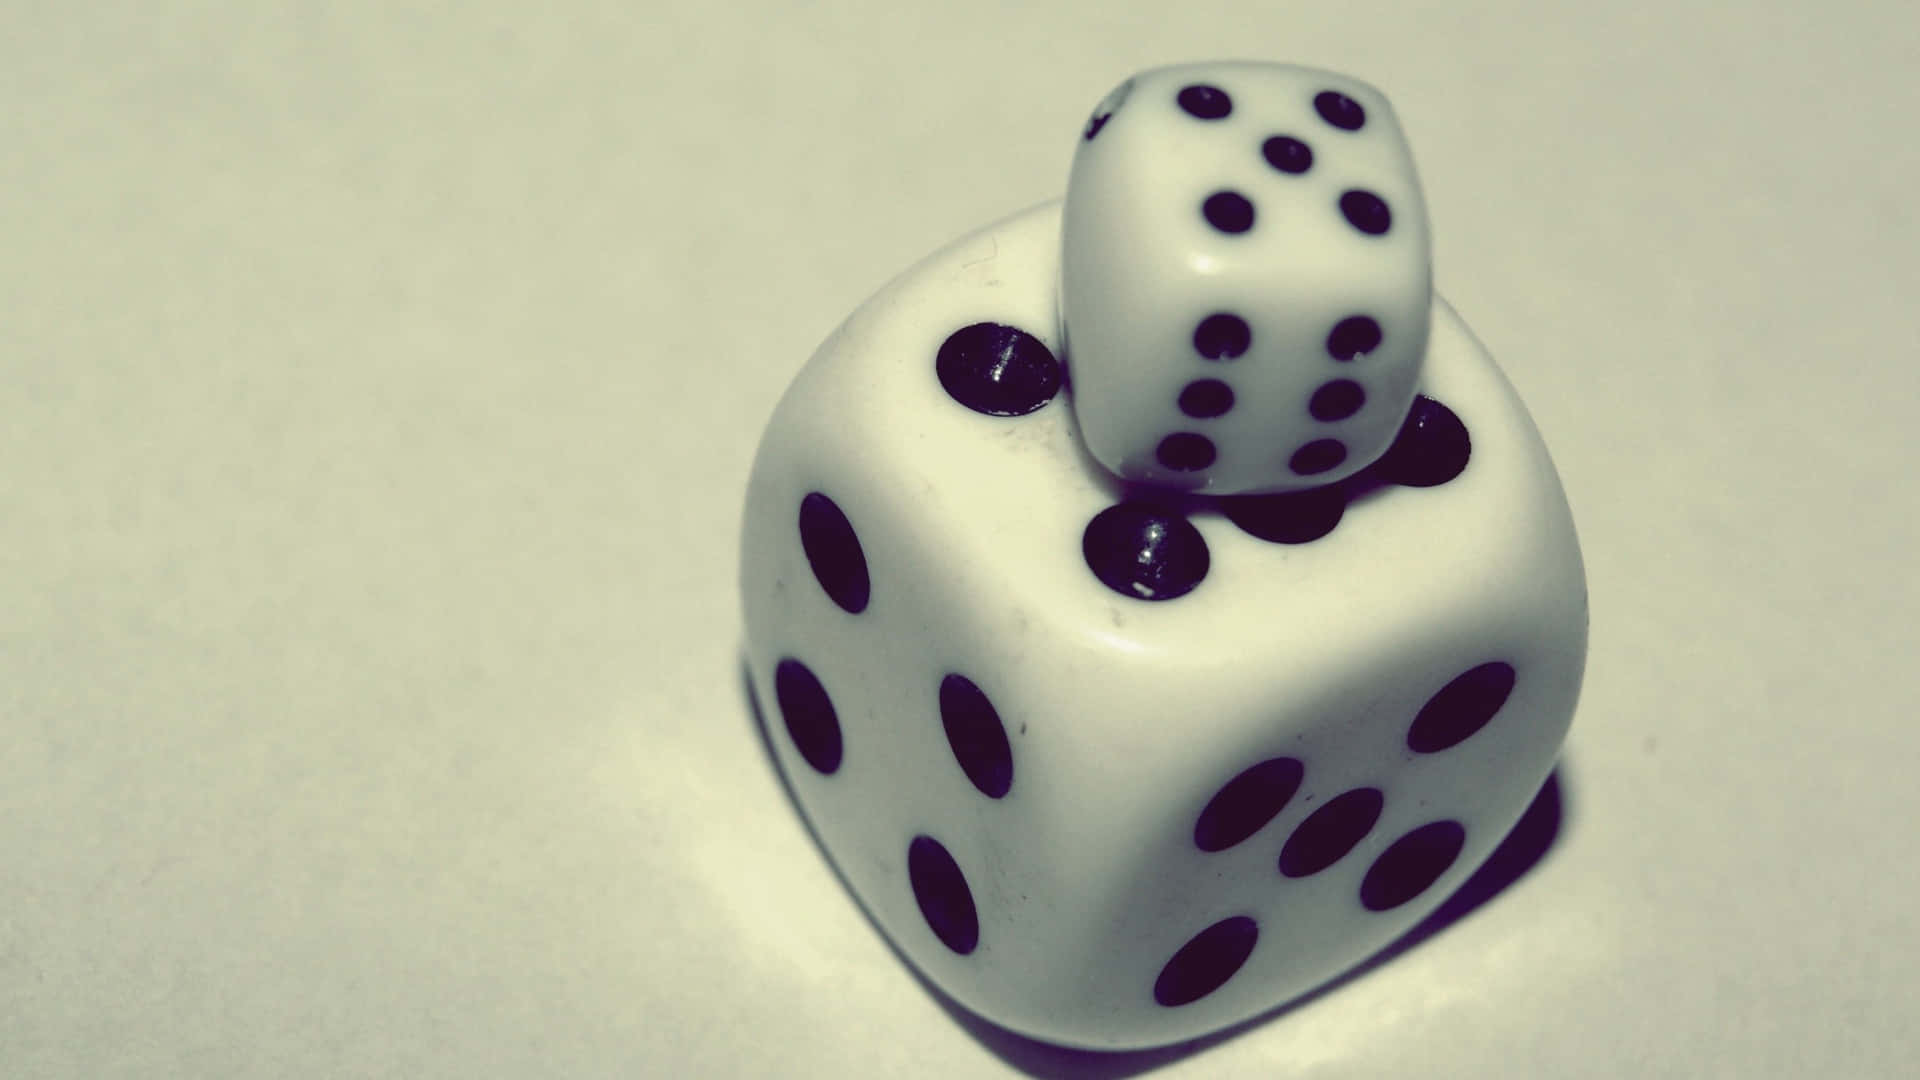 Stacked Dice Monochrome Wallpaper